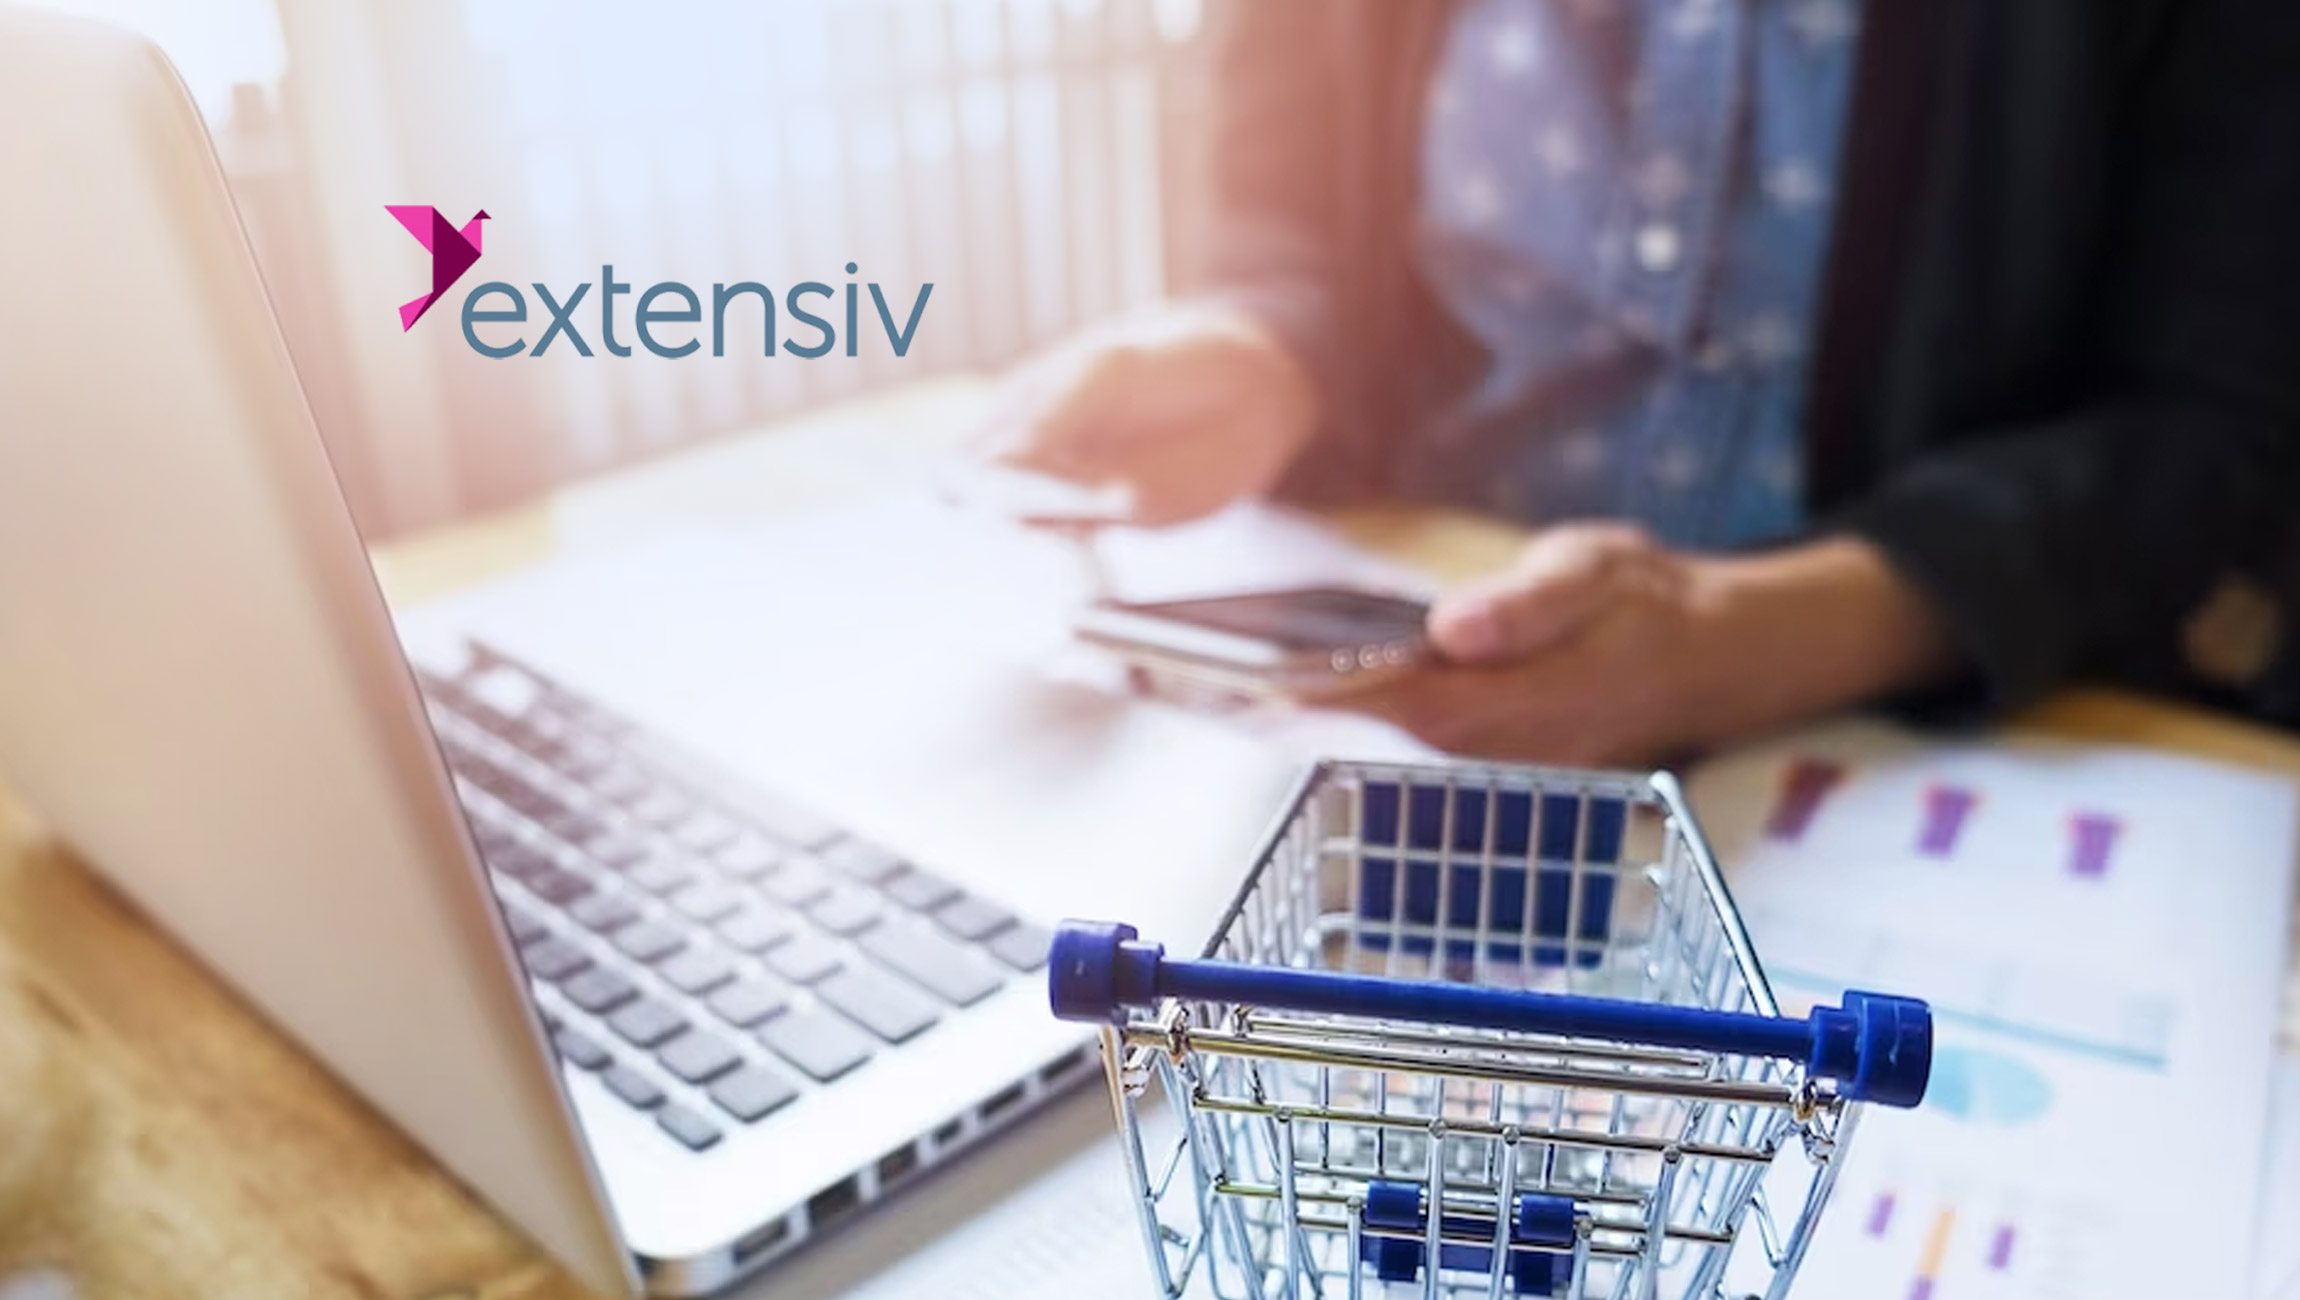 Extensiv Announces Ecommerce Solution Provider Program, Enabling Agencies and System Integrators to Find the Right Fulfillment Solutions for their Customers